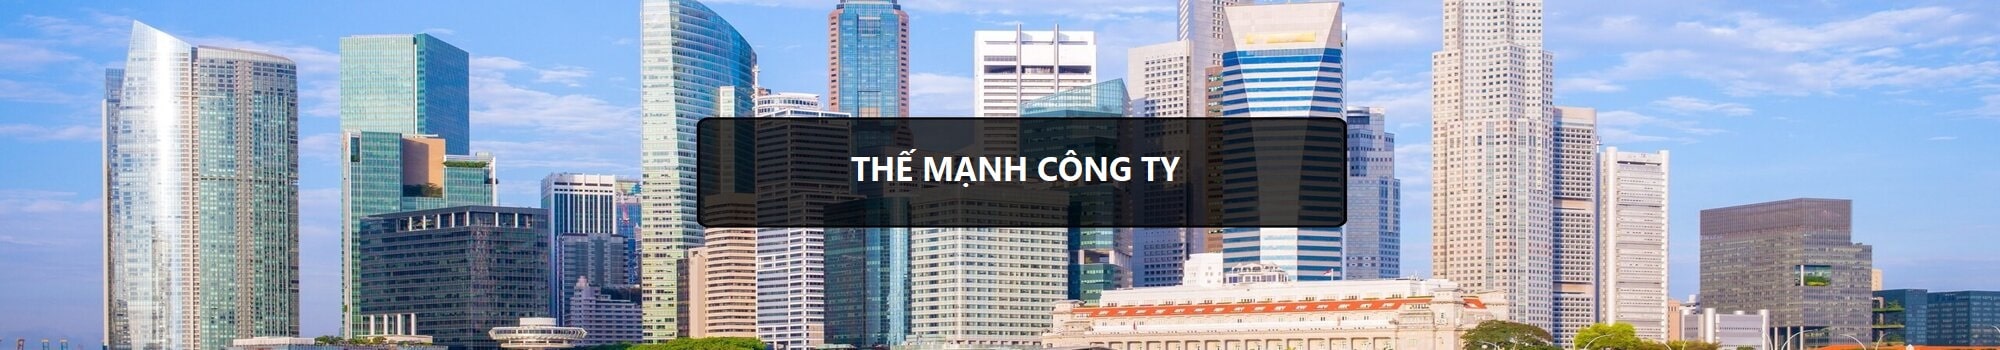 1. hang-luat-alegal -the-manh-cong-ty-